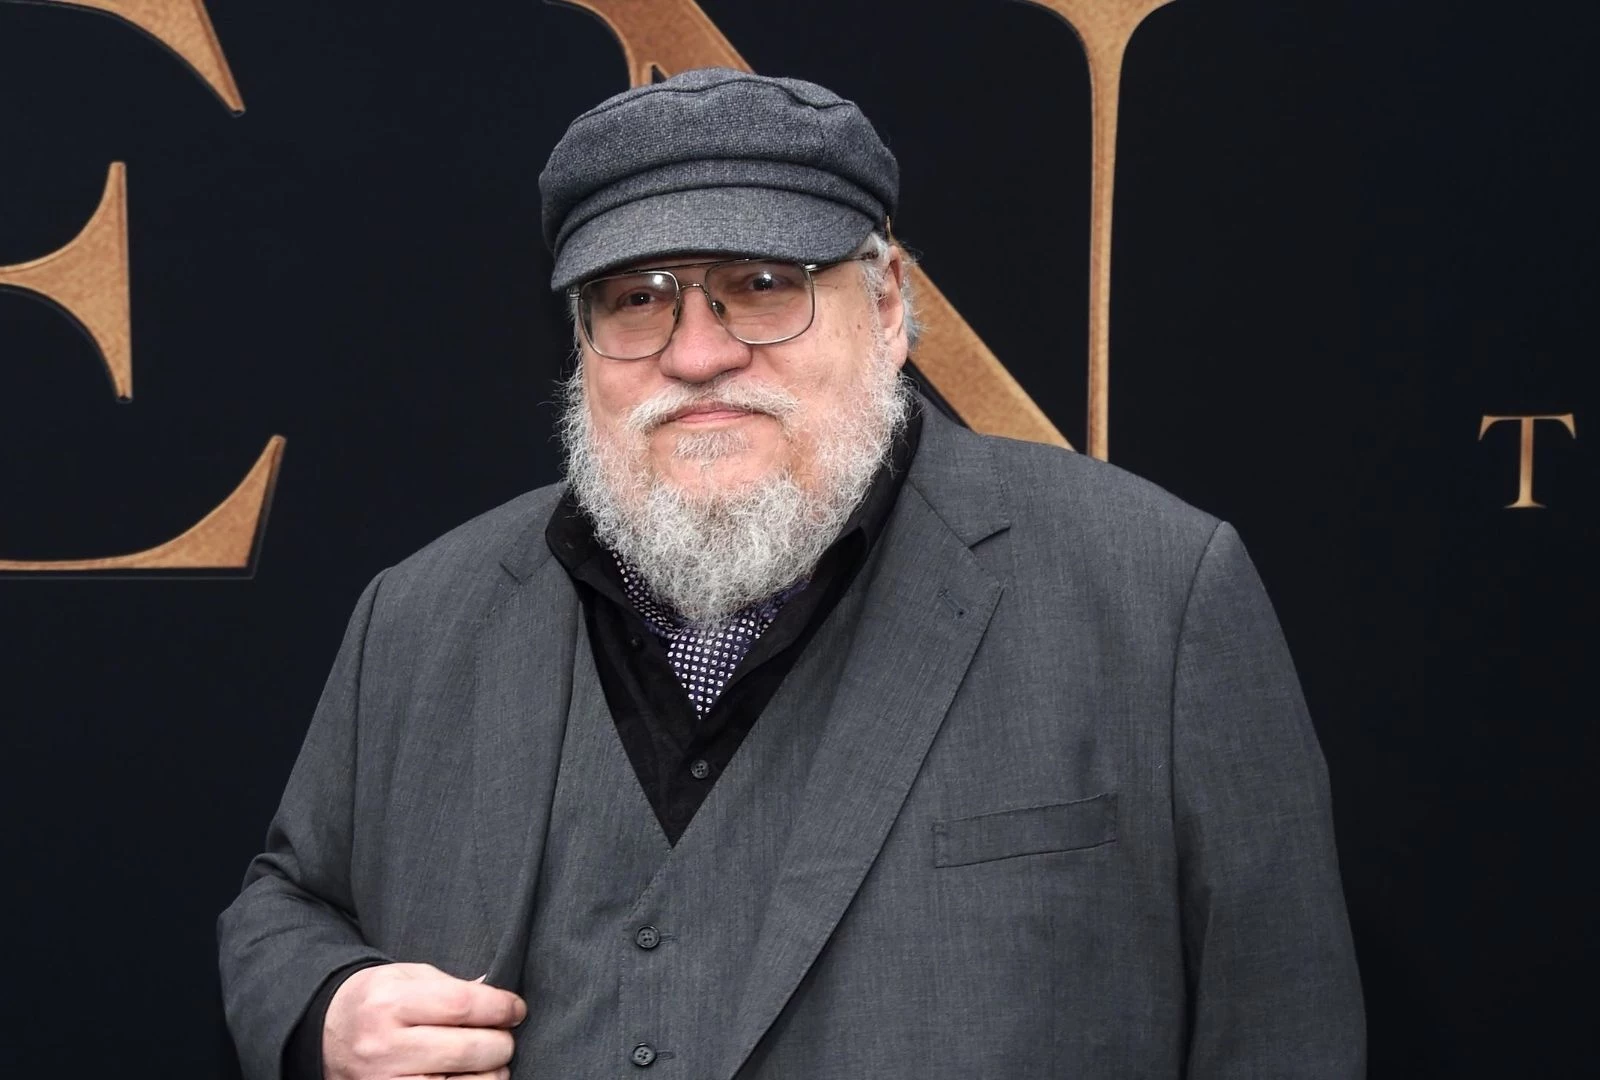 grr martin the winds of winter